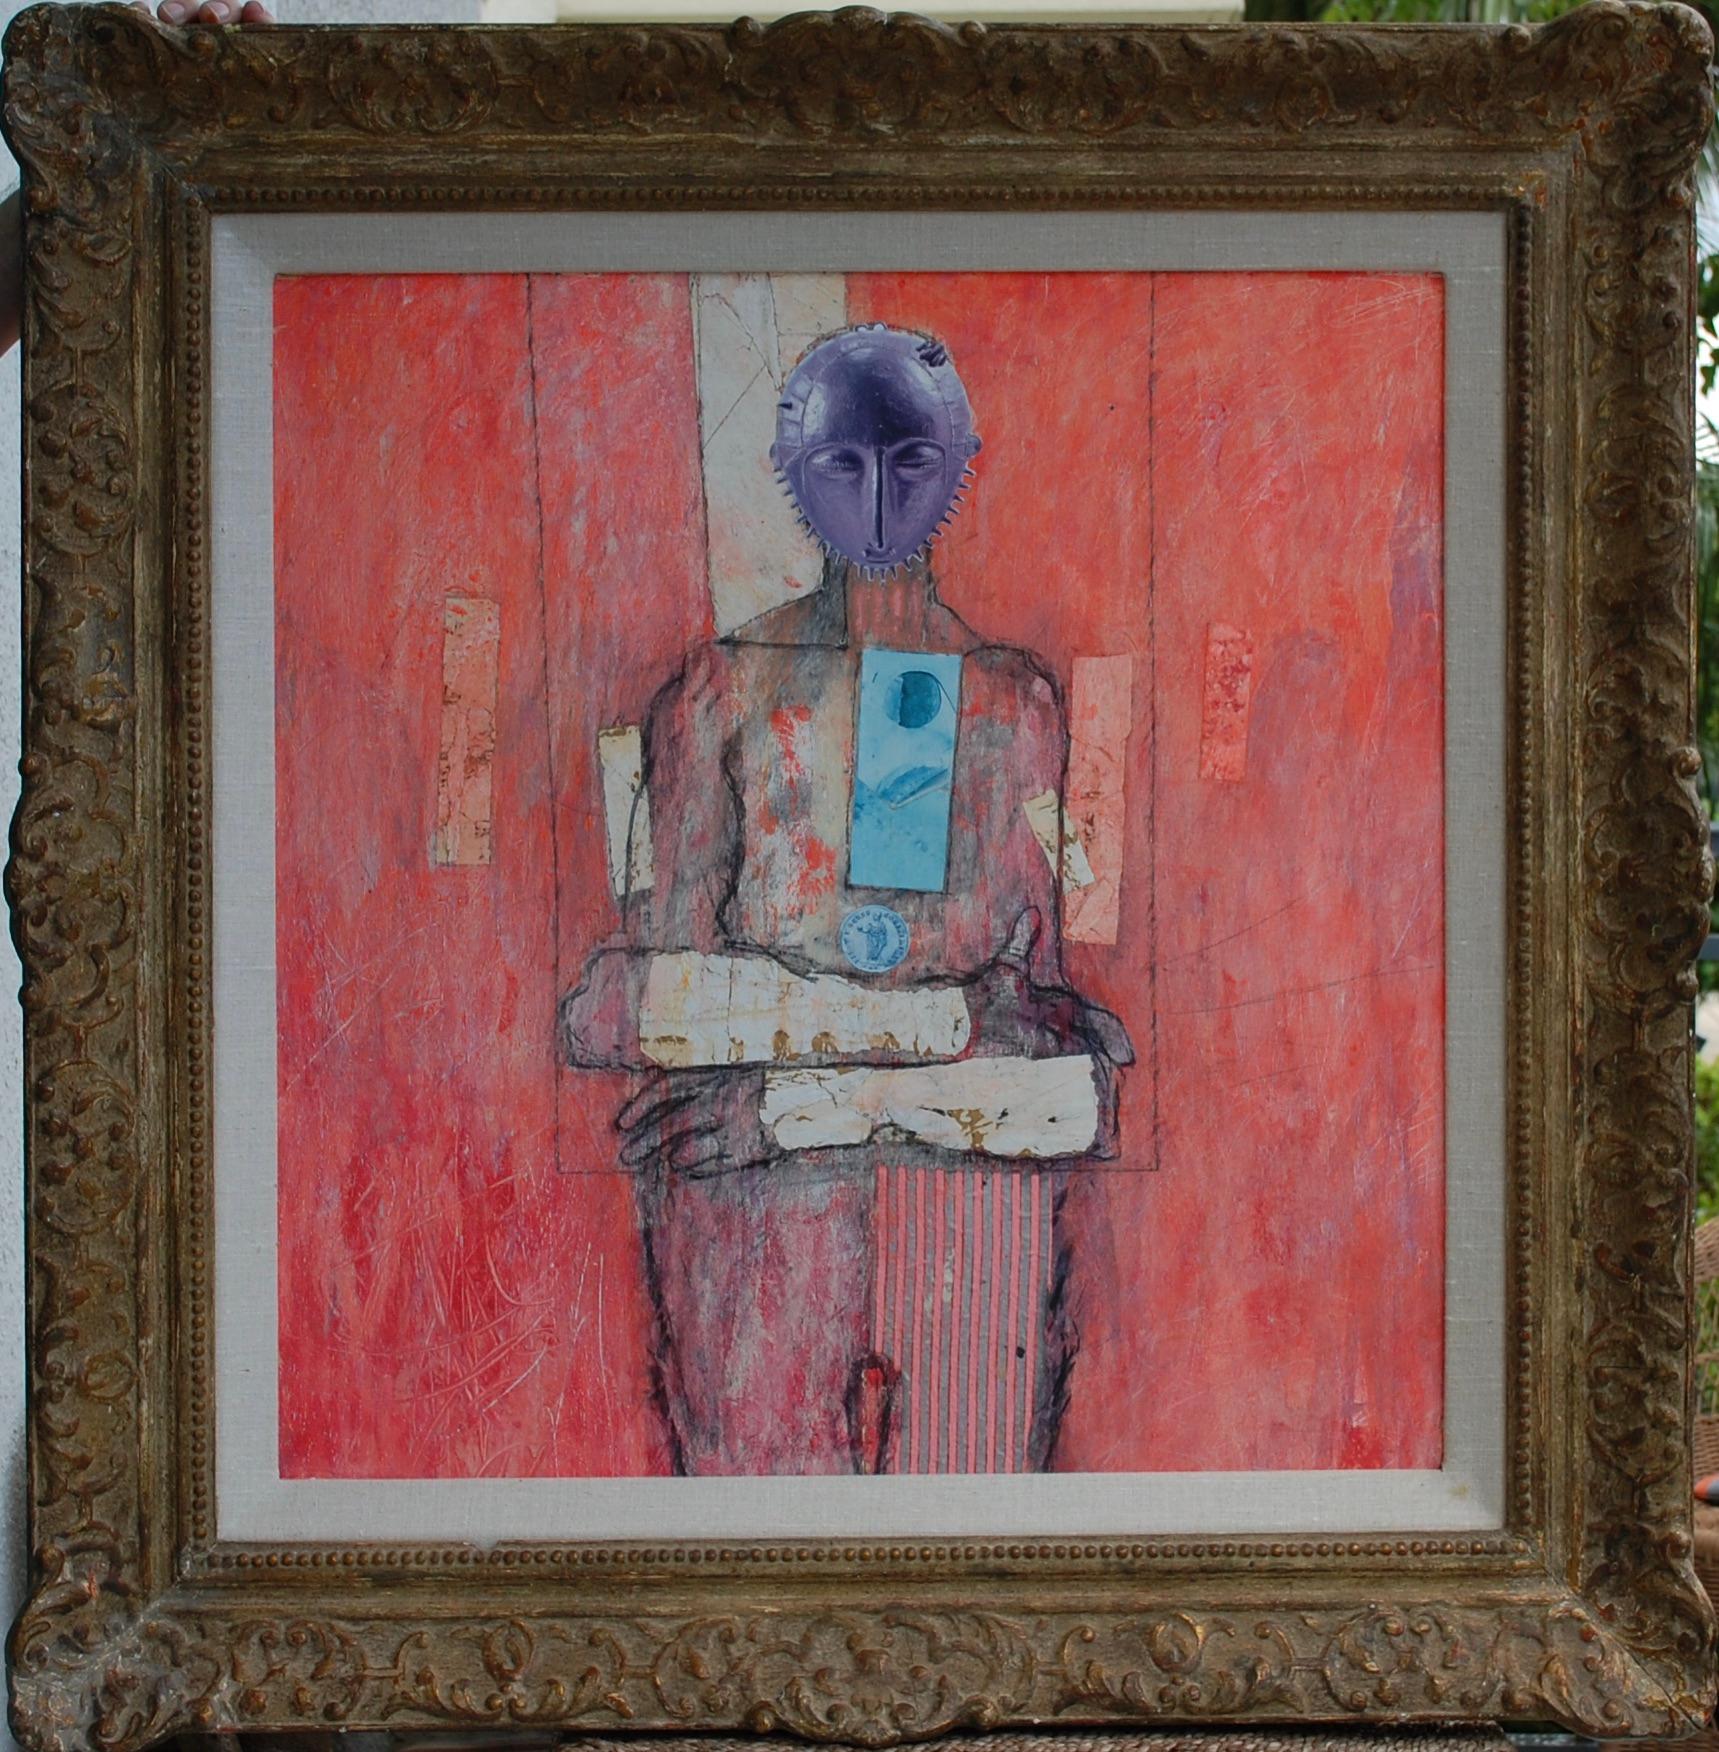 Patrick Archer Figurative Painting - Primus Mixed Media on Panel